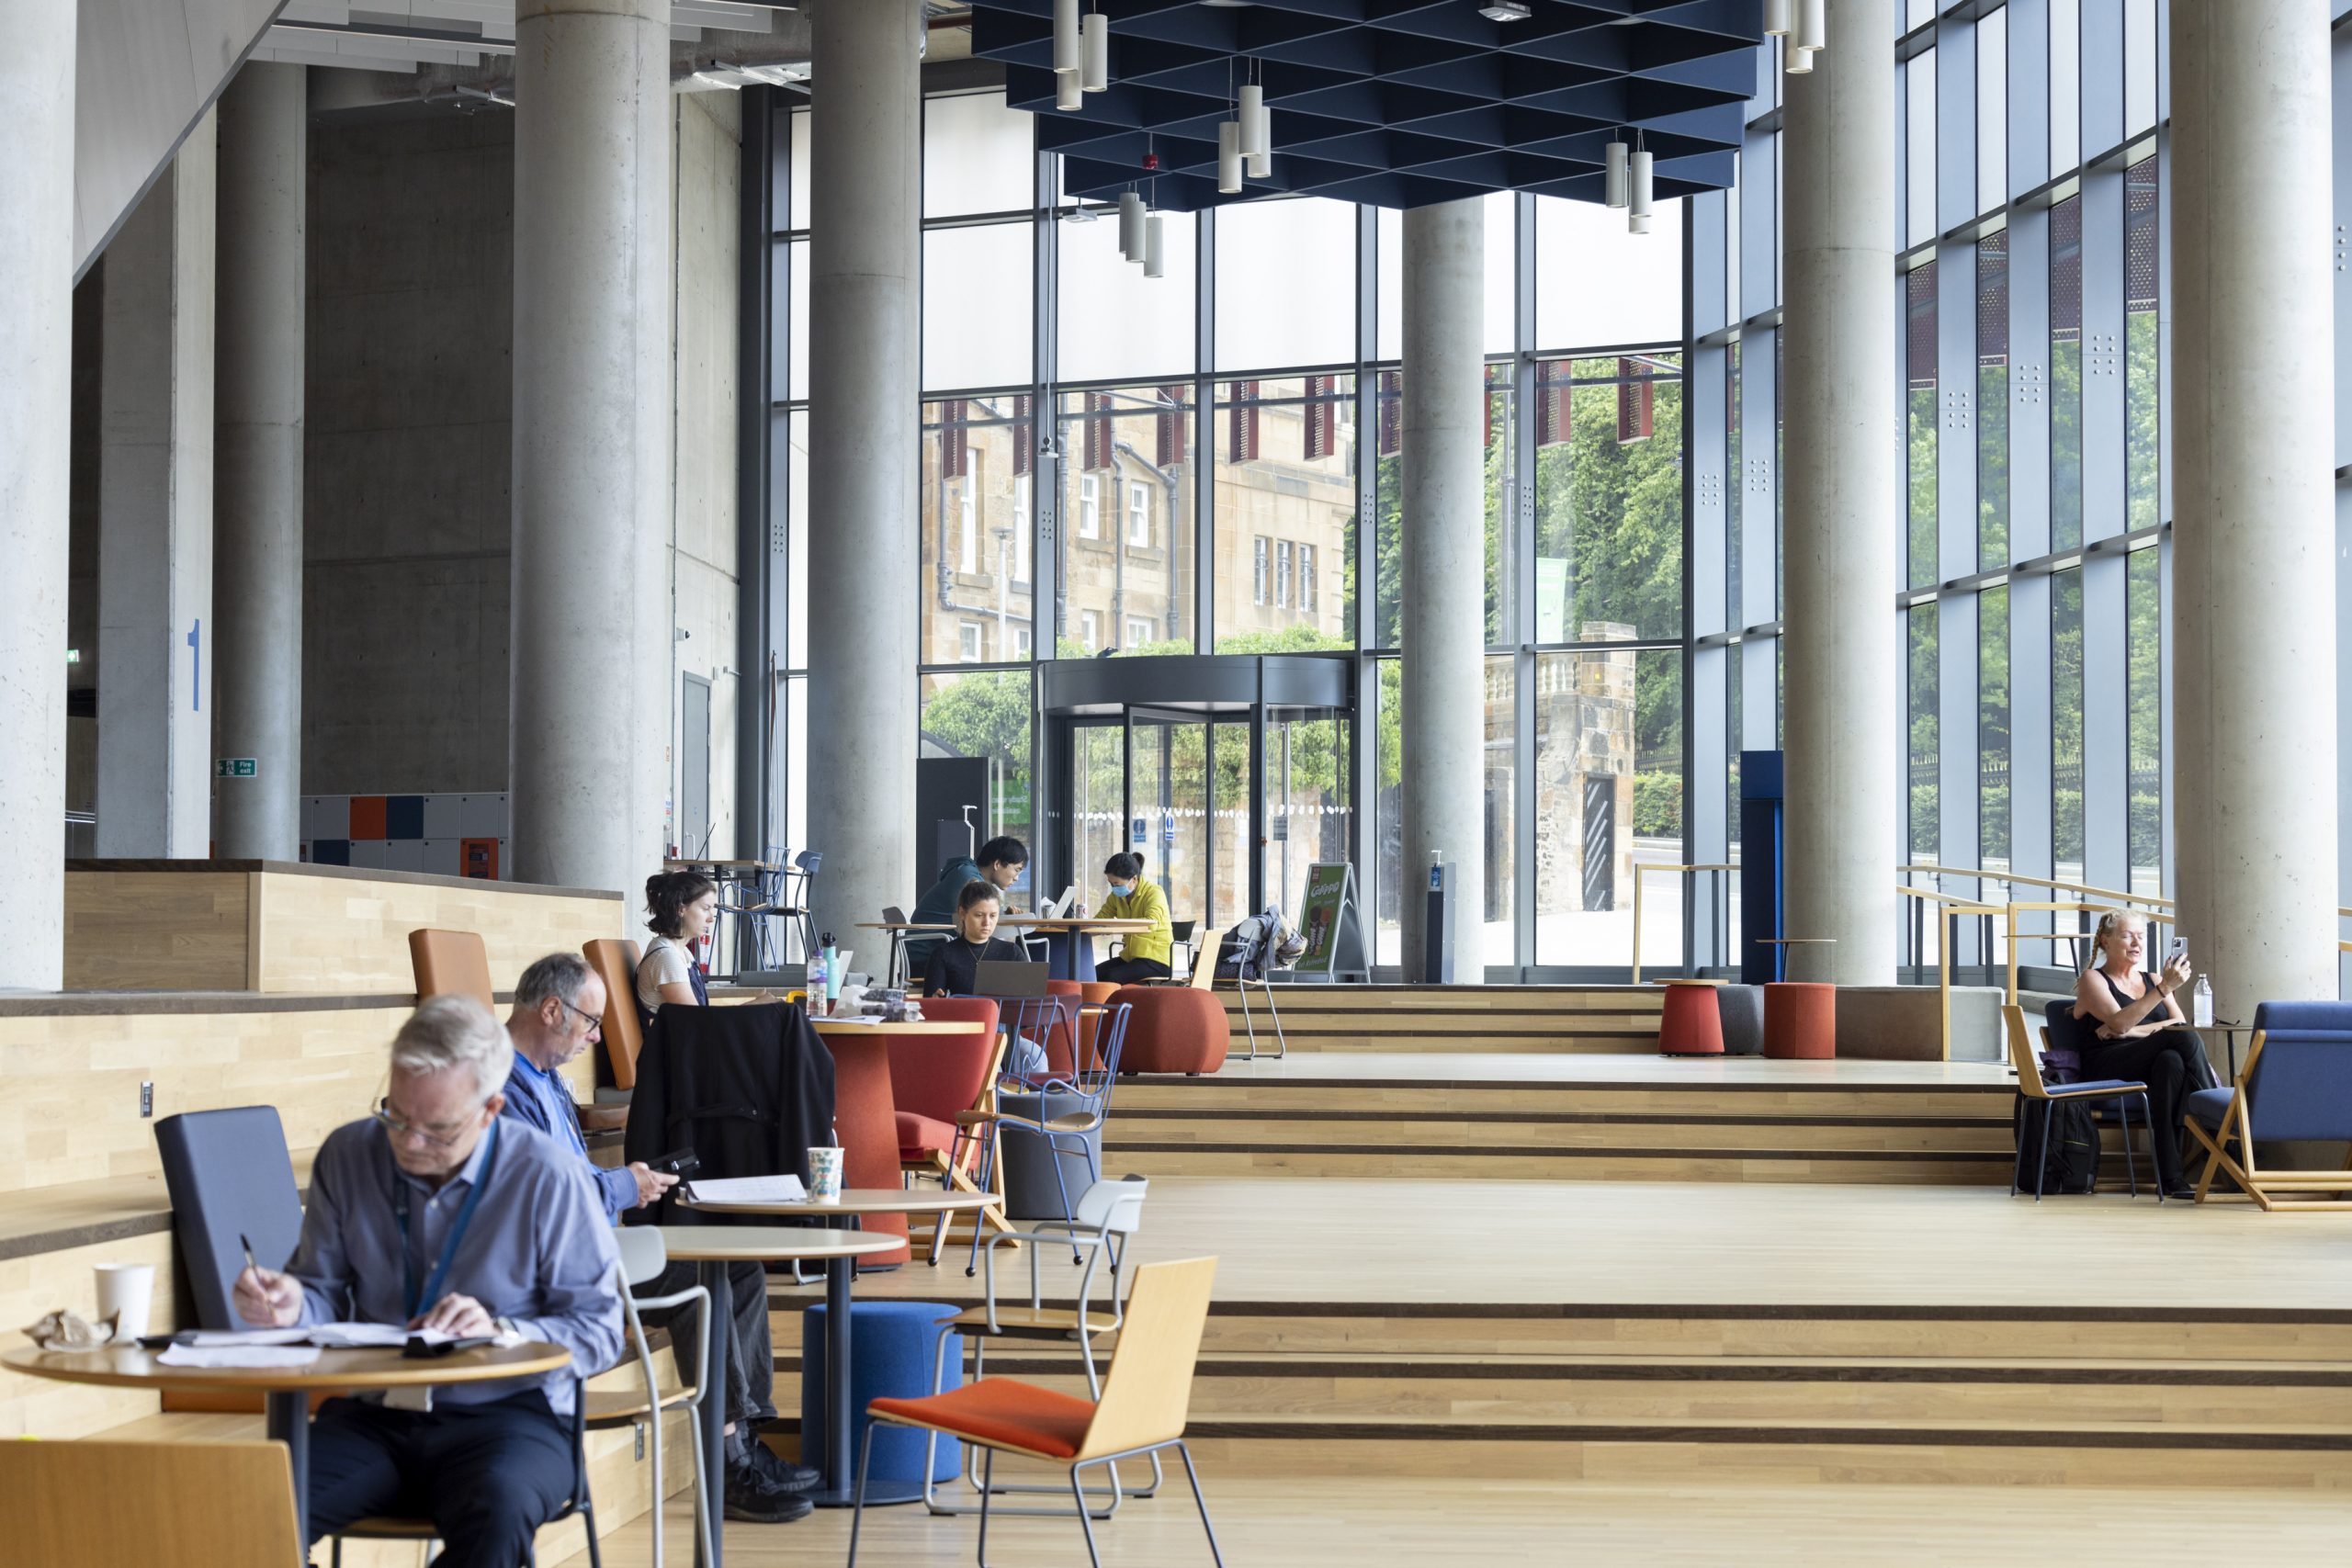 Glasgow’s New Learning Hub: An Investment in Students and their Future 360 magazine